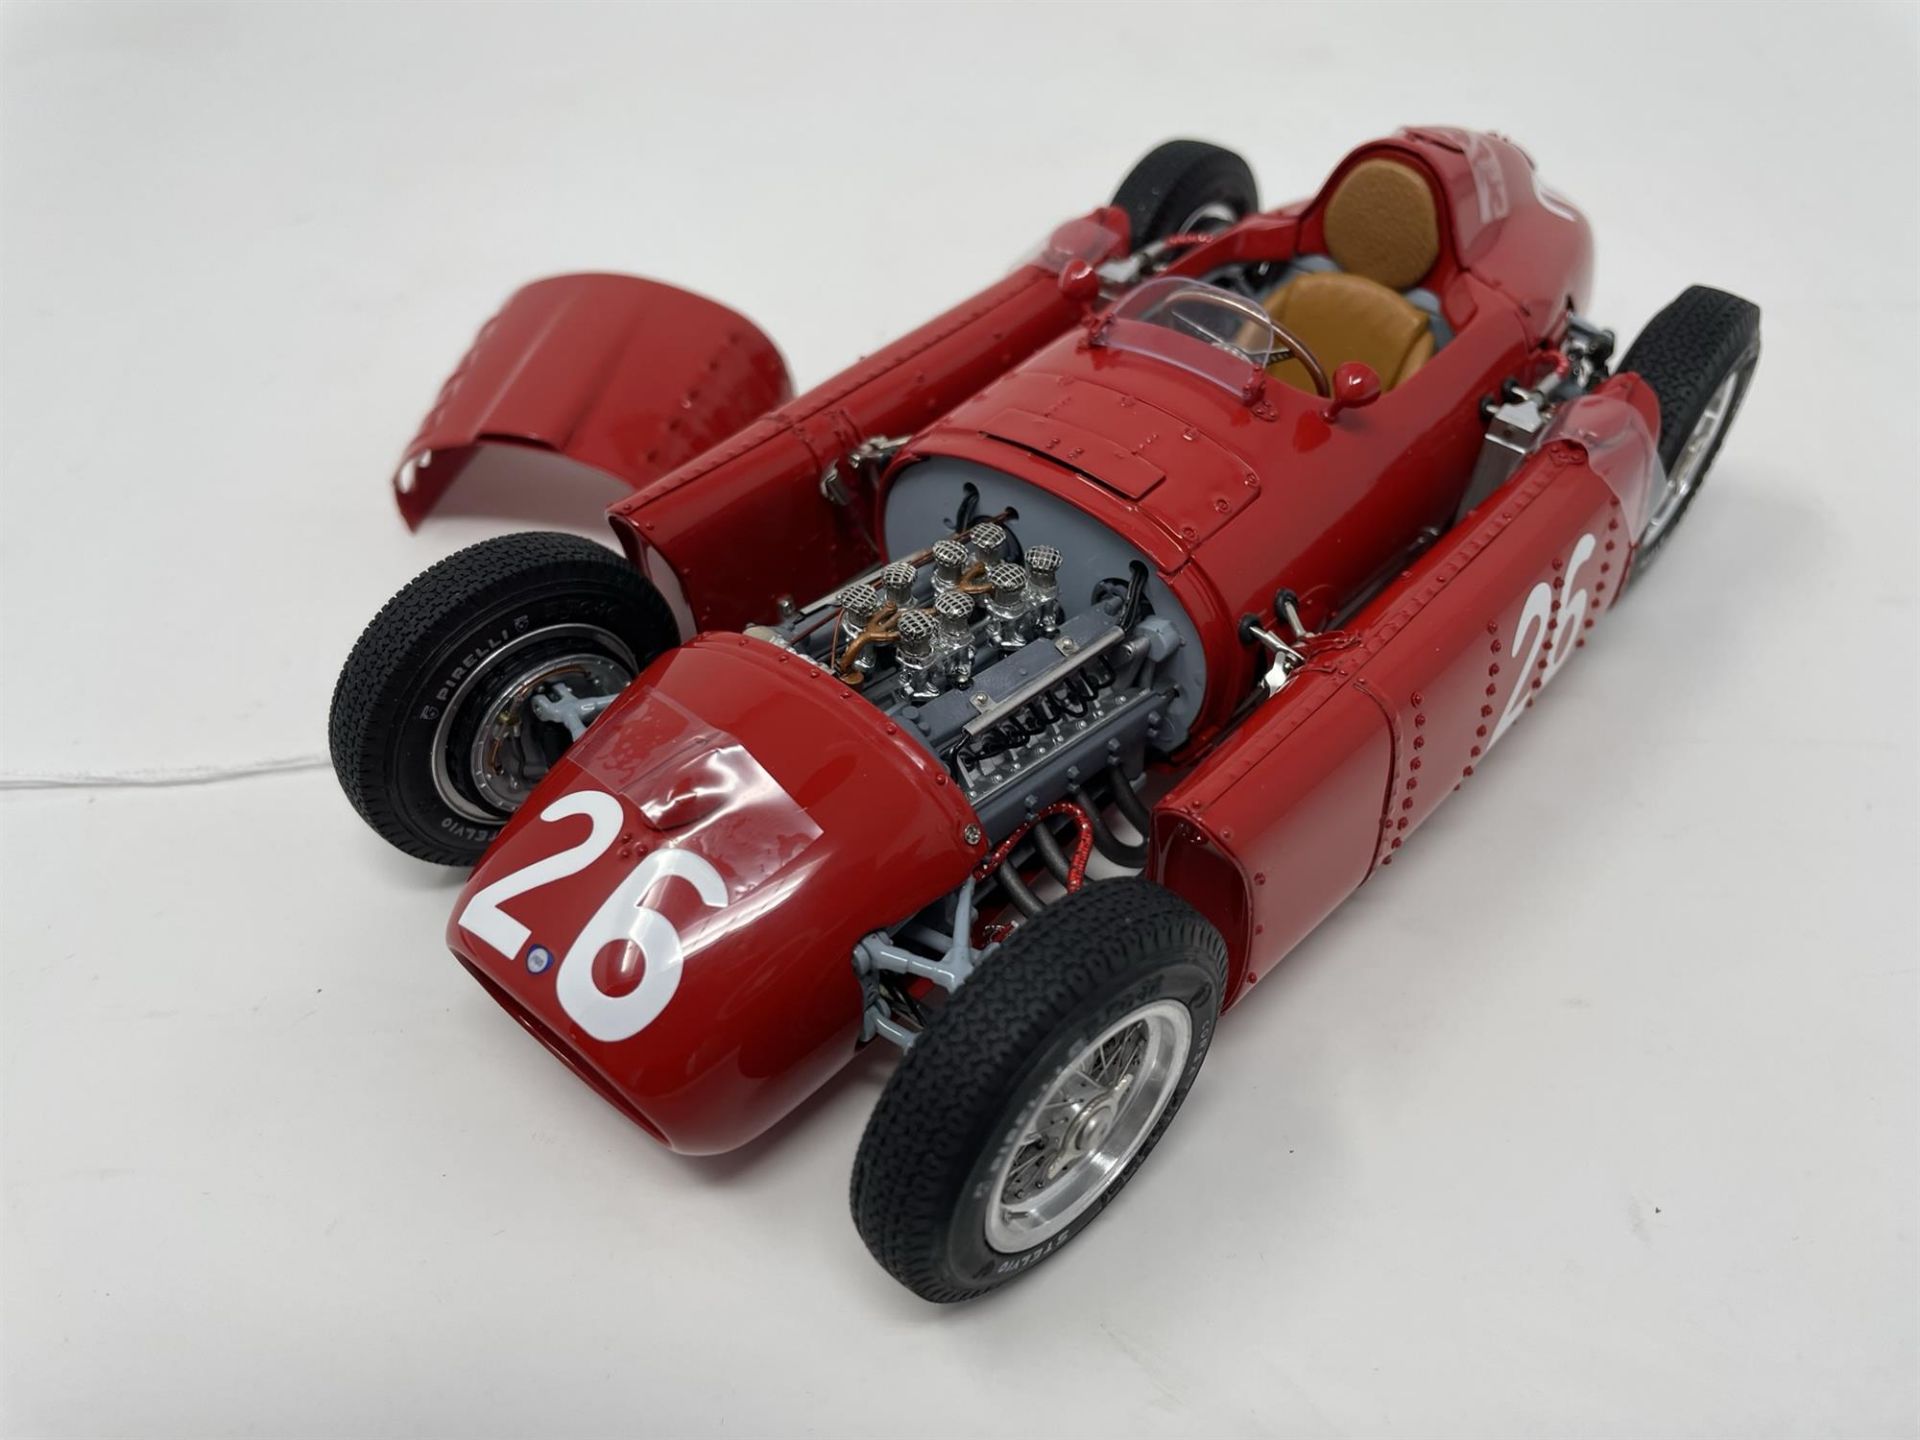 CMC Lancia D50 1:18th Scale Highly Detailed Model - Image 2 of 10